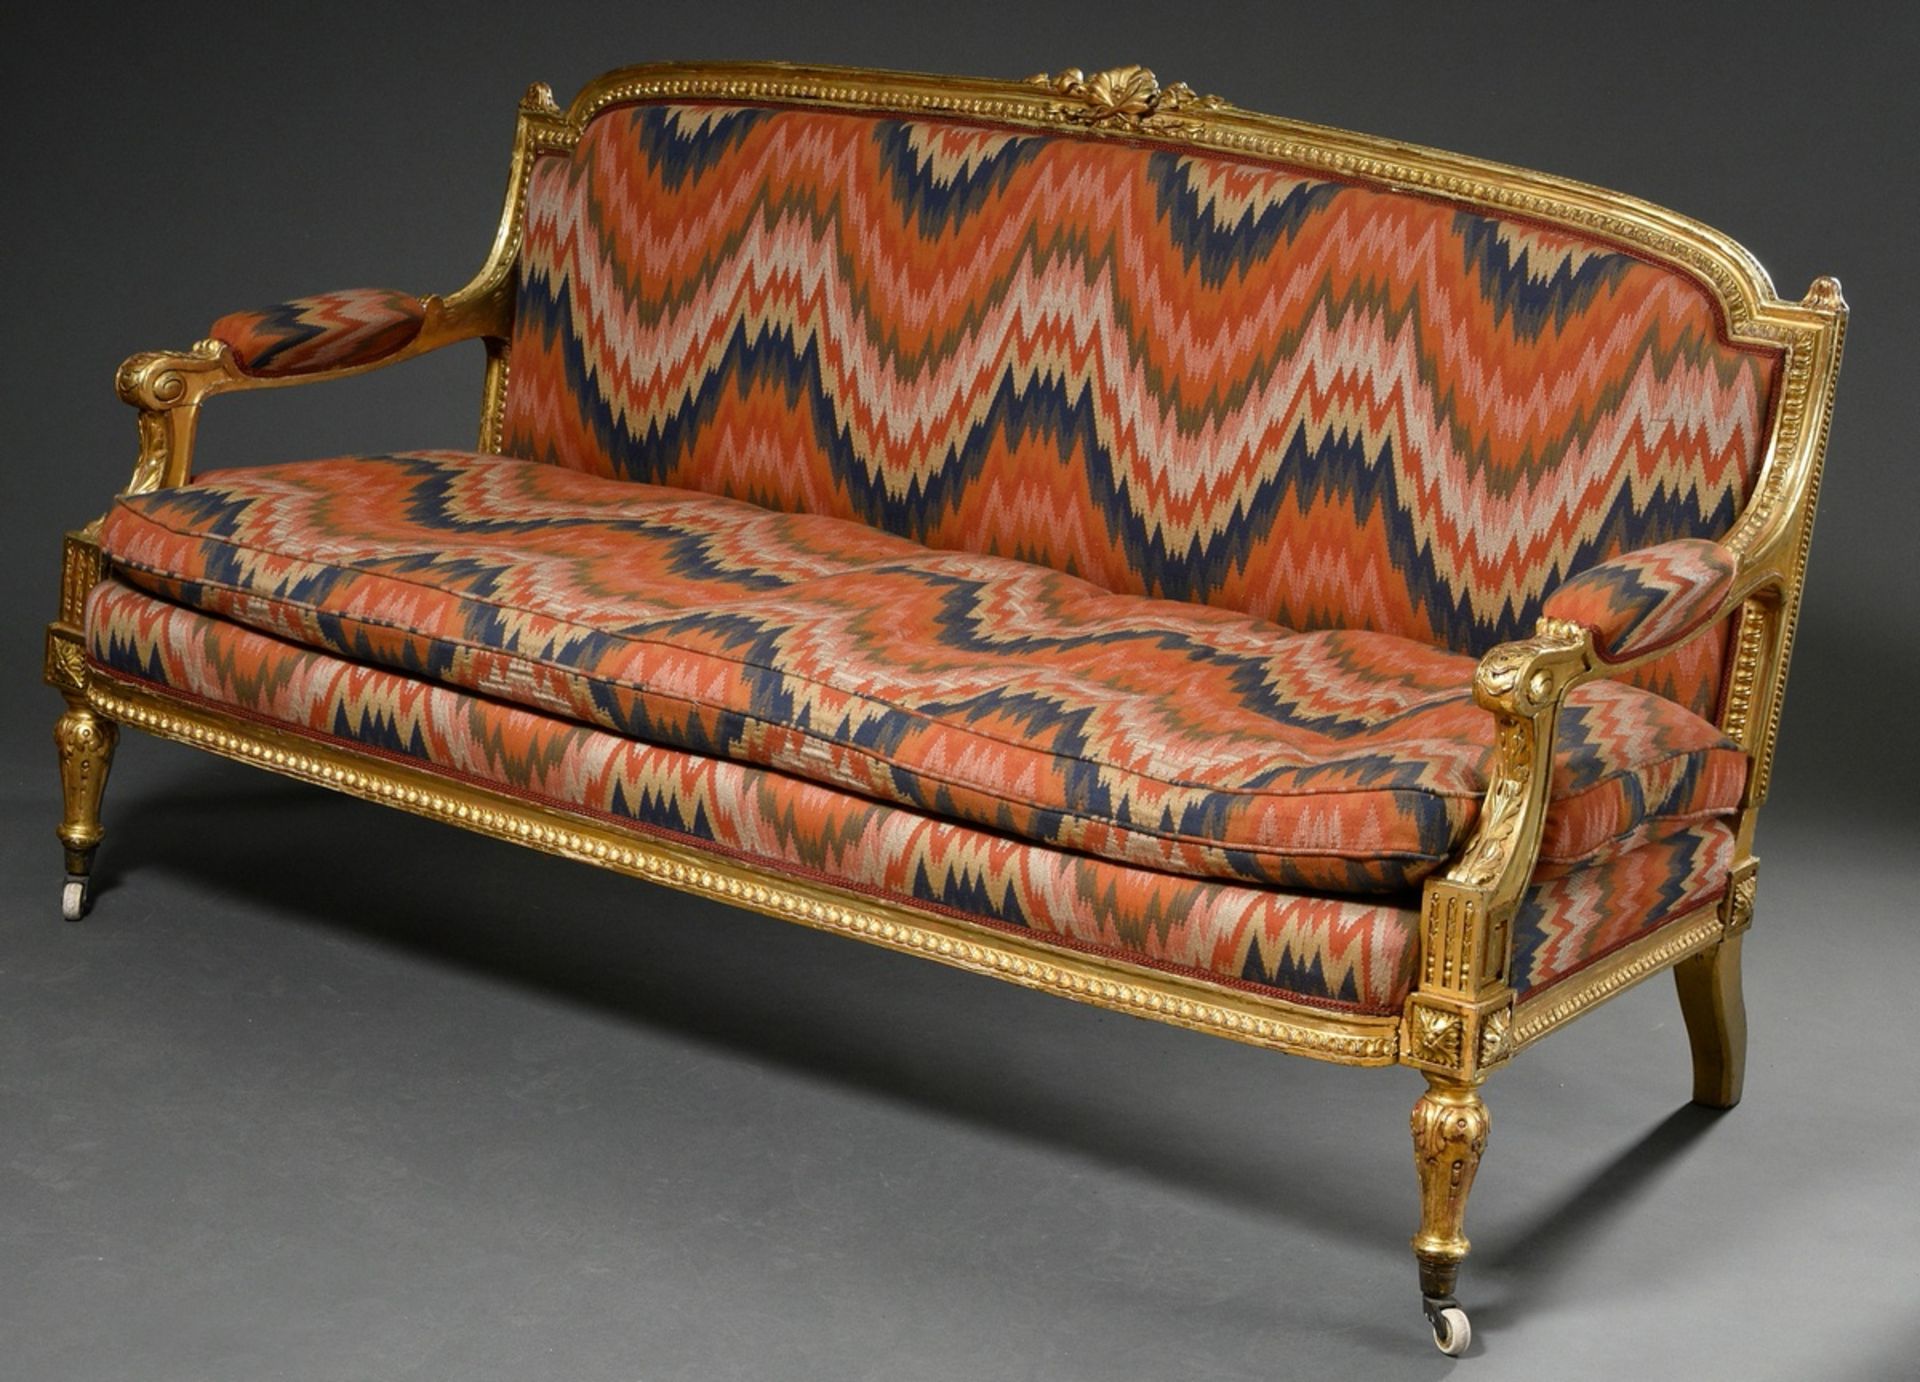 Louis XVI style sofa with leaf-gilded carved frame and opulent upholstery fabric in ikat look, arou - Image 2 of 6